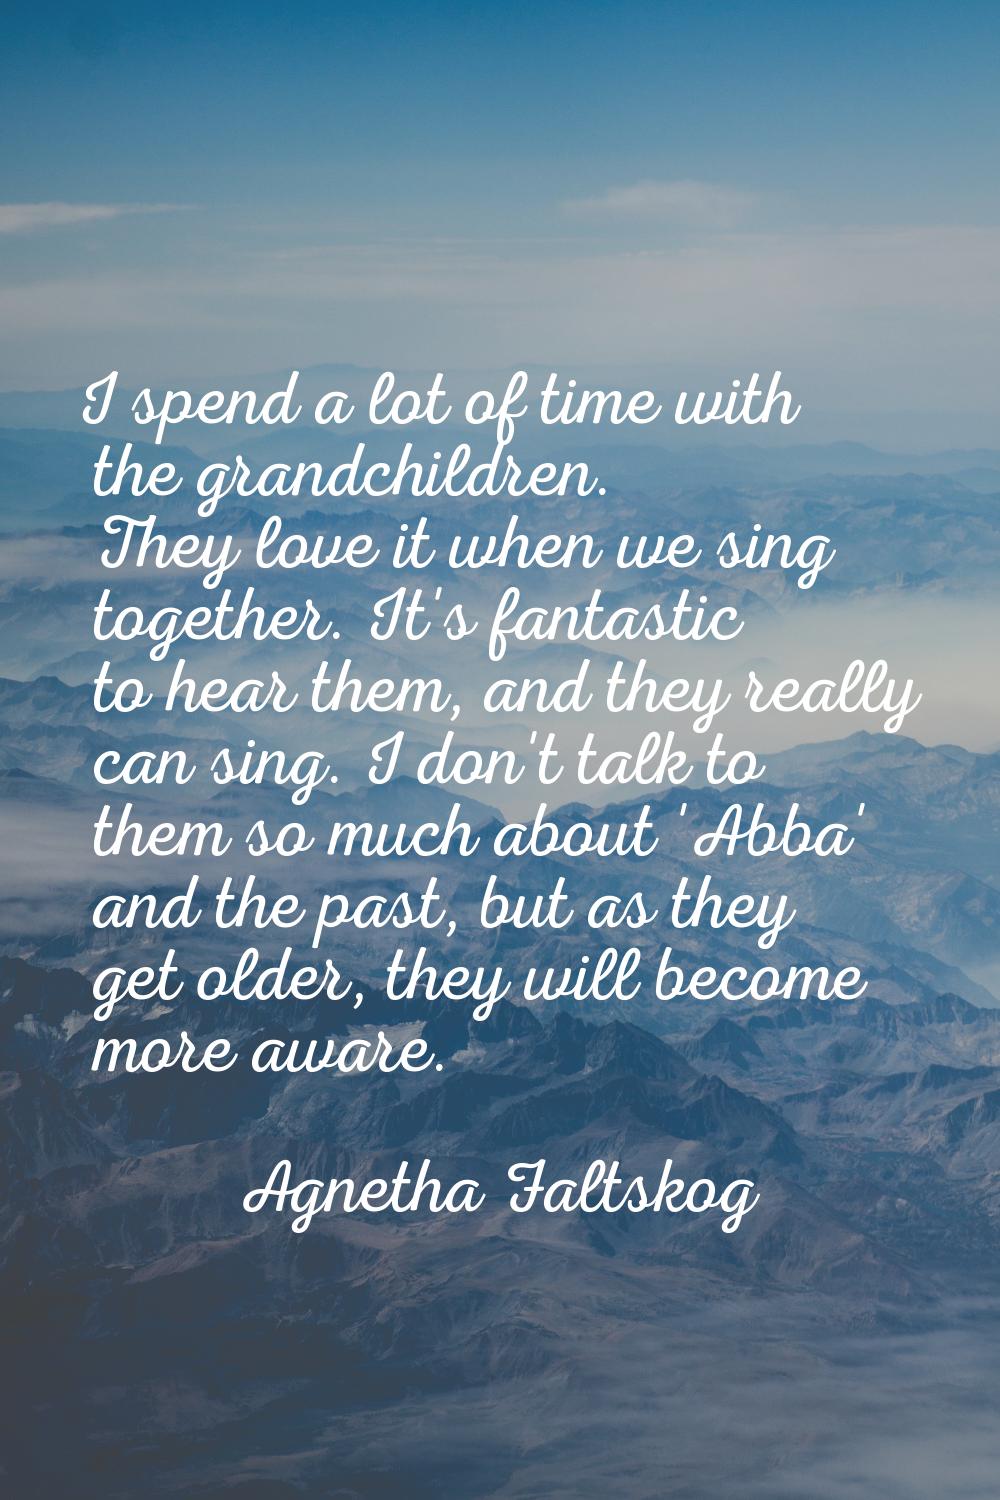 I spend a lot of time with the grandchildren. They love it when we sing together. It's fantastic to